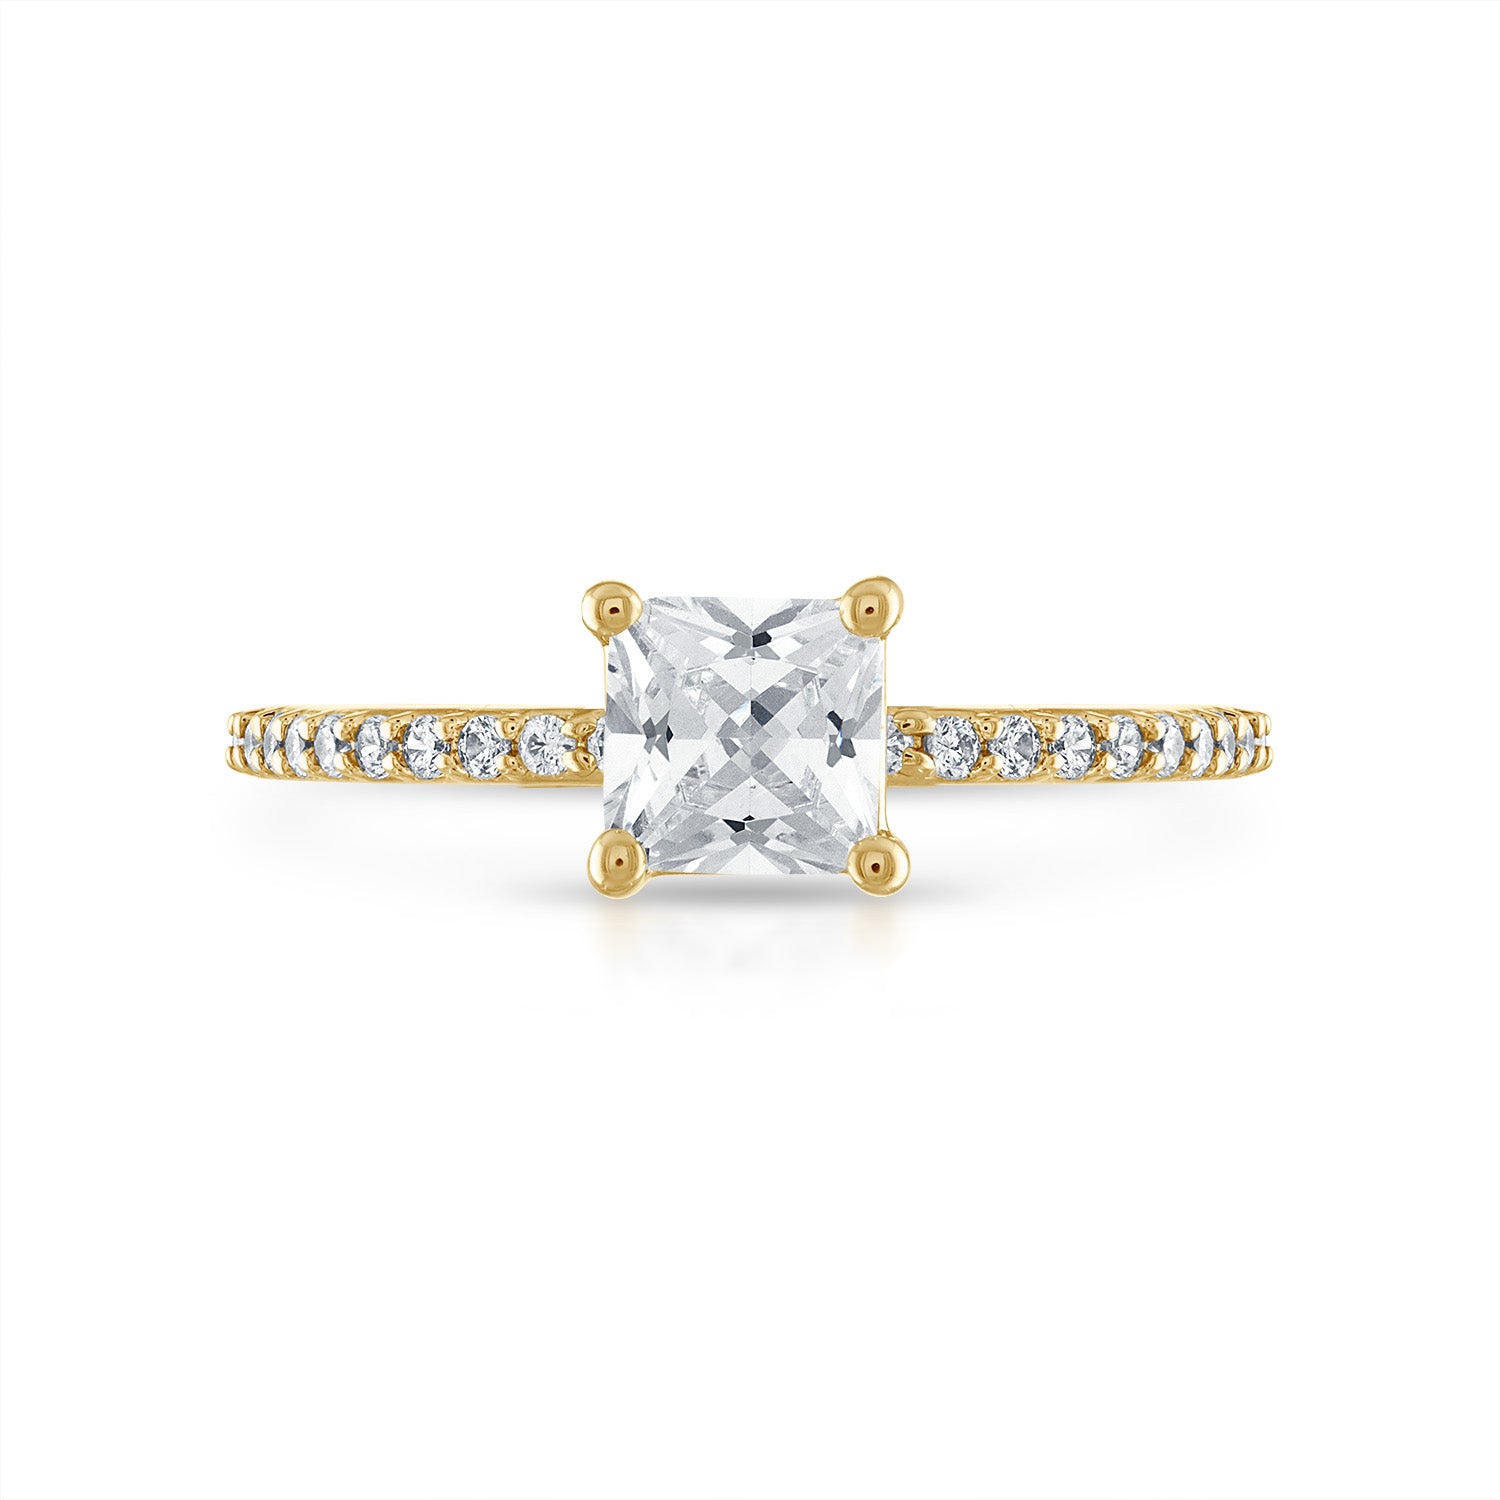 Princess Pave with Pave Underbezel Engagement Ring in Yellow Gold